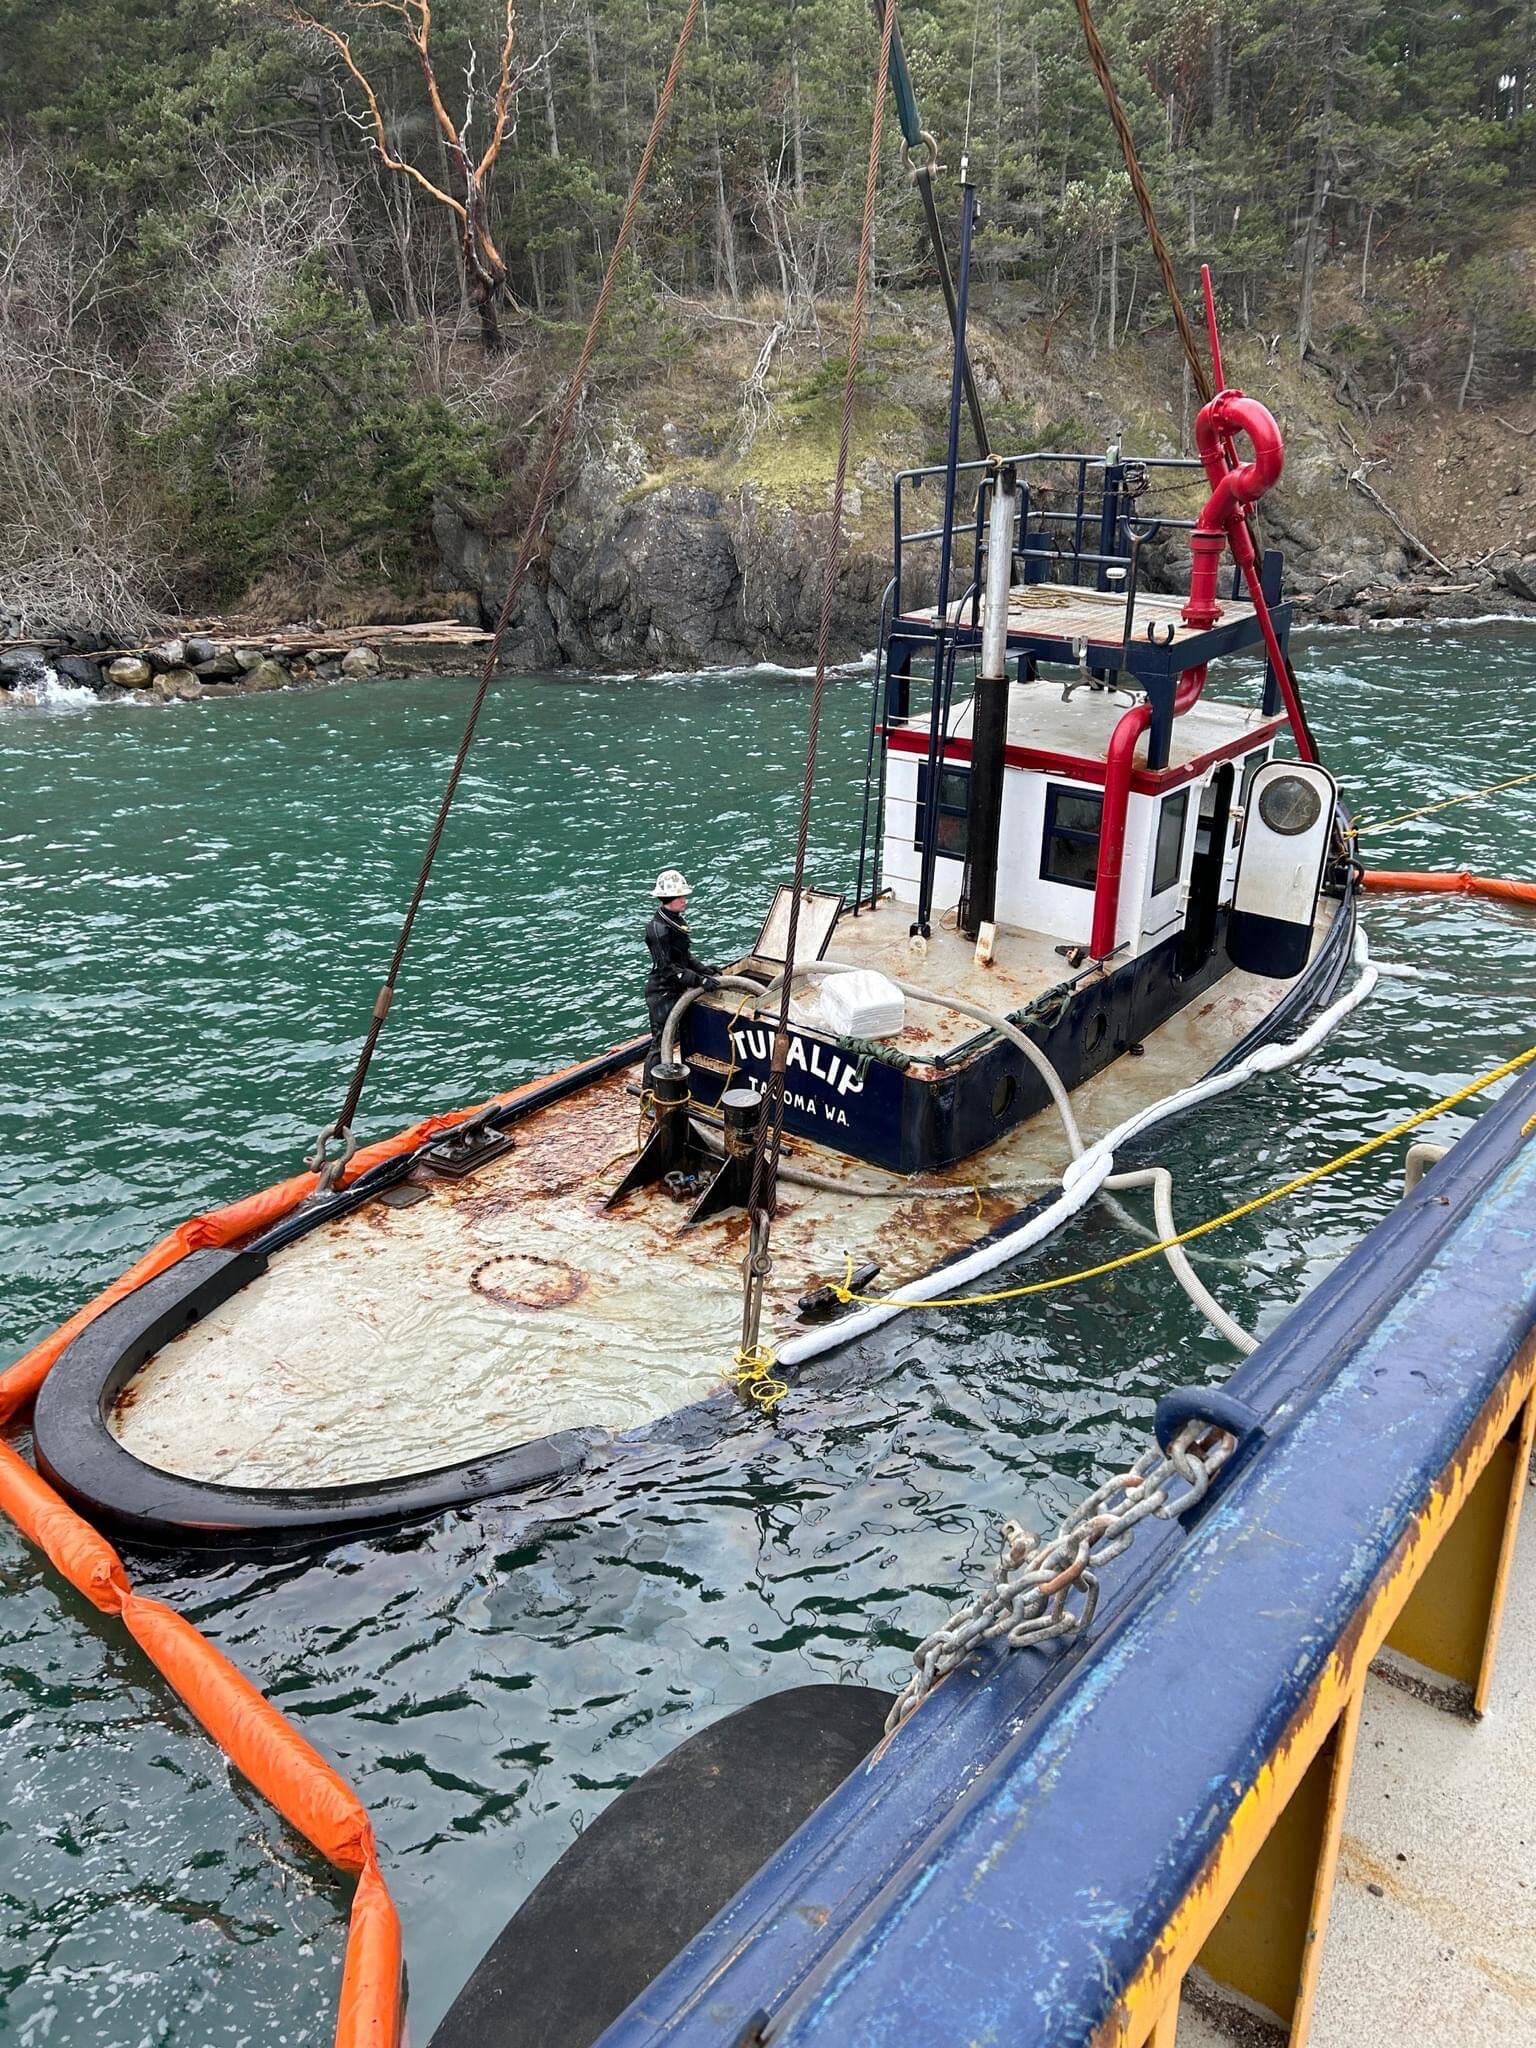 Contributed photo.
The partially submerged Tugboat Tulalip is suspended alongside a response vessel near the Lopez ferry terminal in preparation for removal.